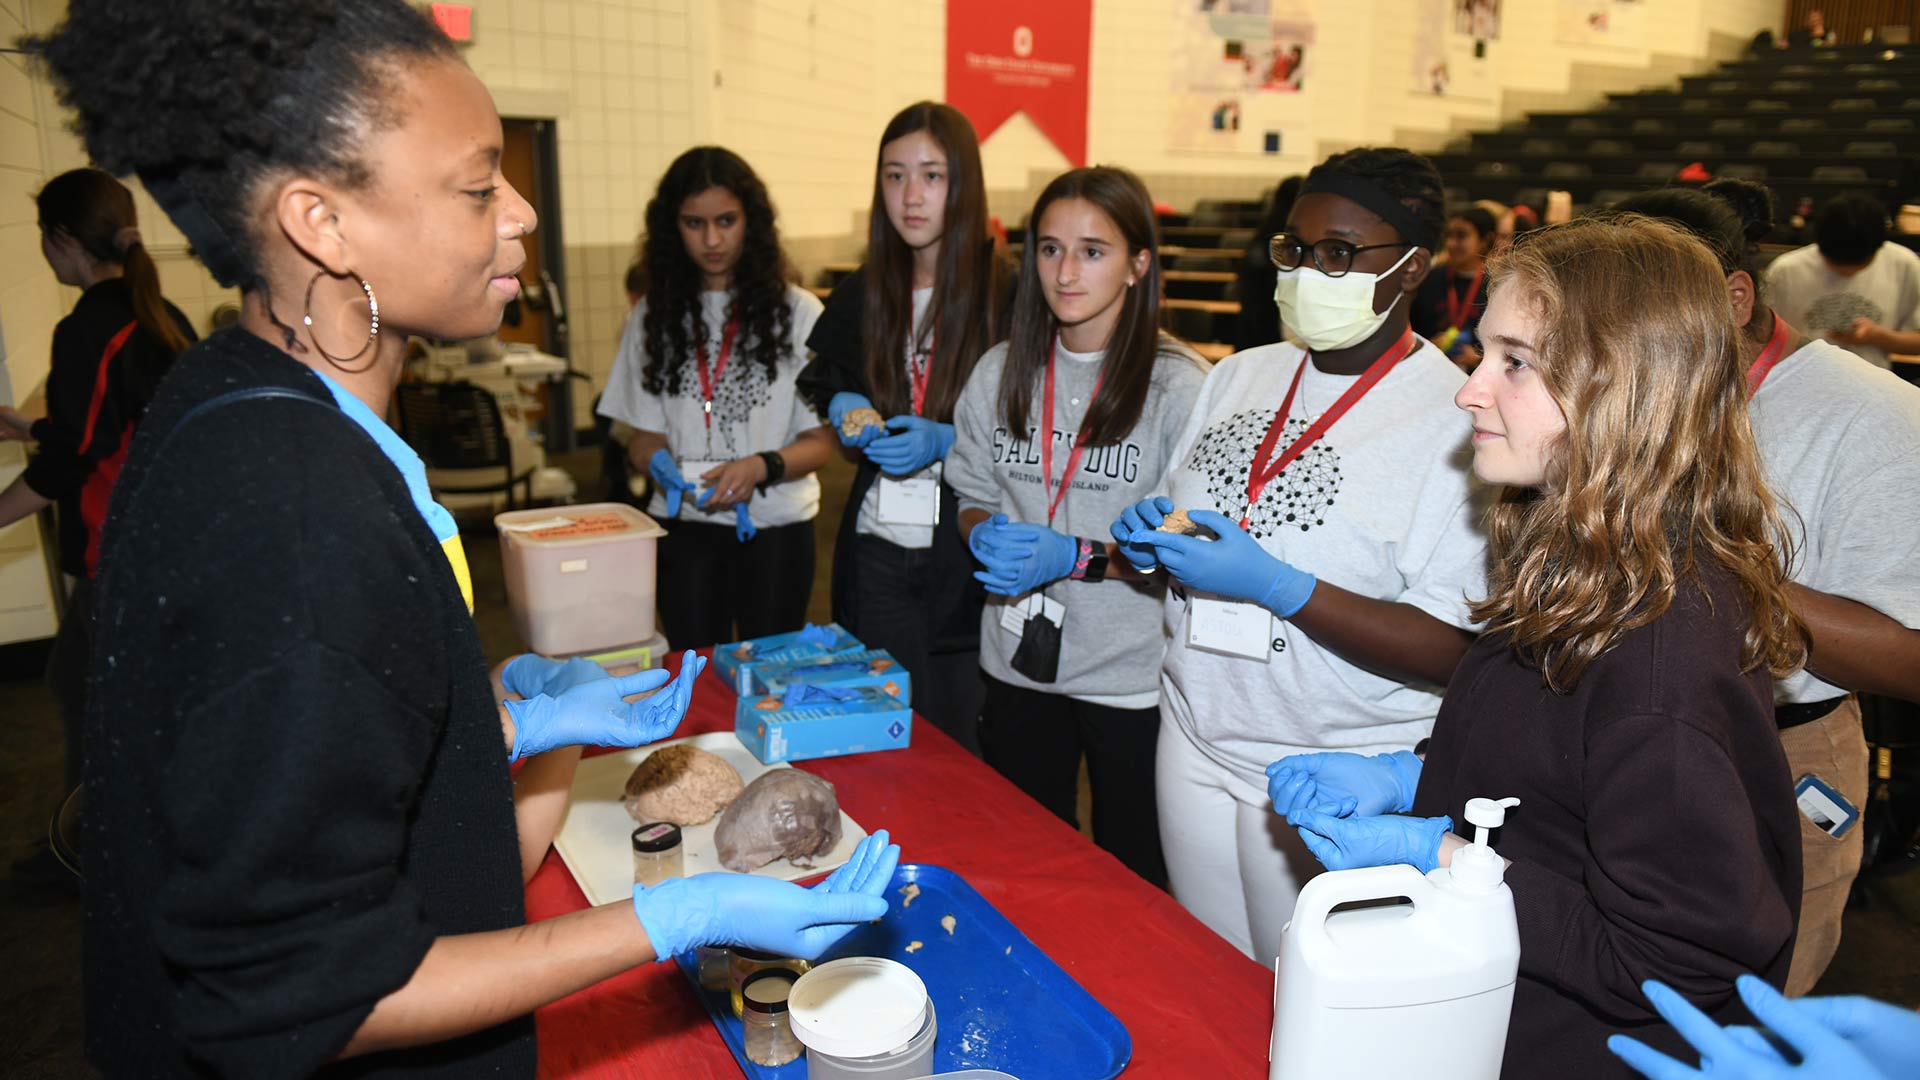 High school students lining up to see a real brain during the STEM Summer Camp at Ohio State